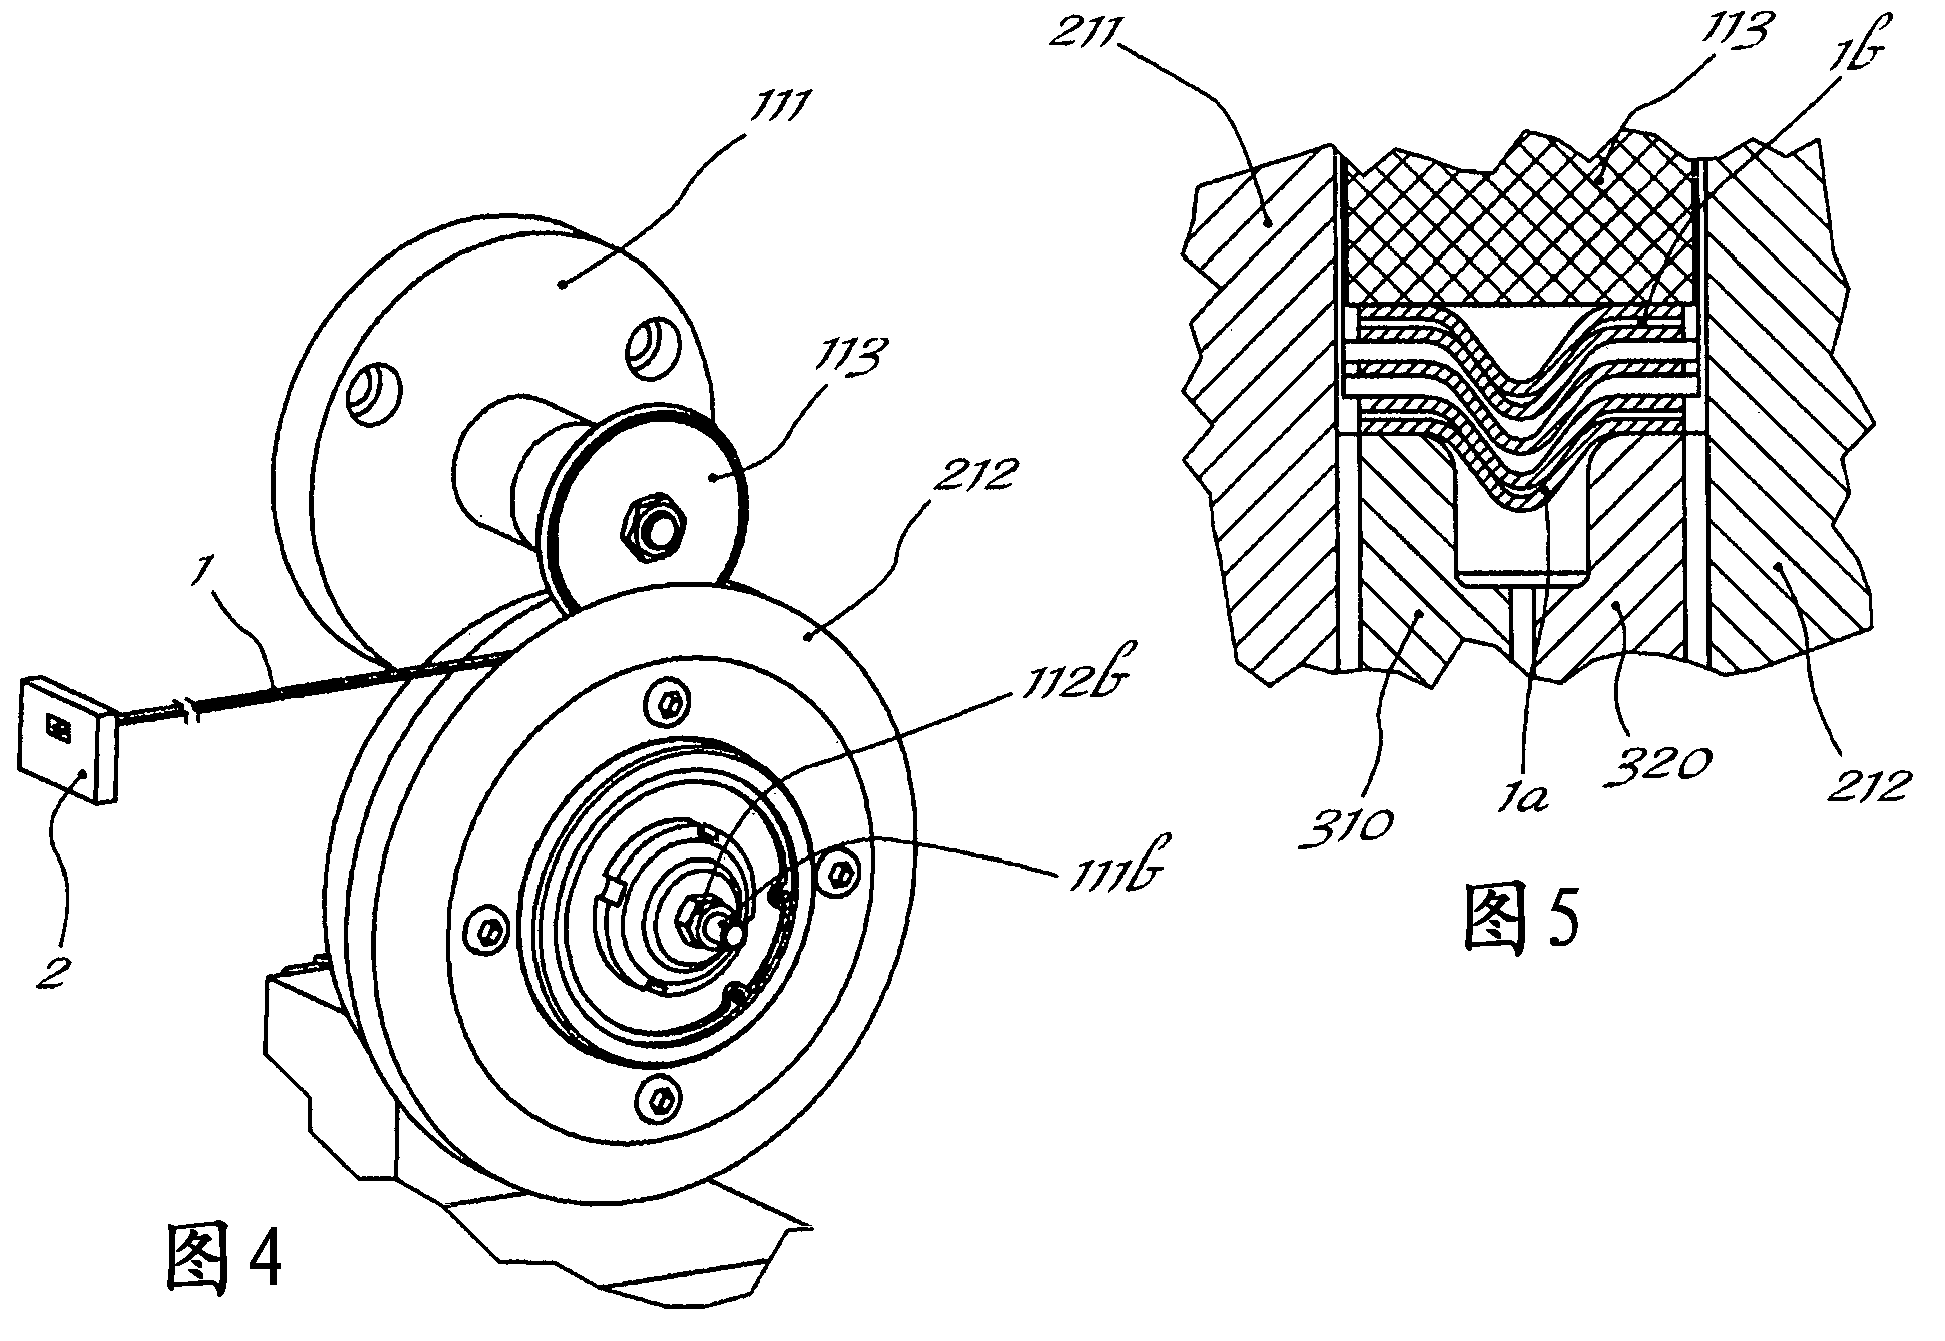 Apparatus for Welding Continuous Strips Wound on a Support Ring